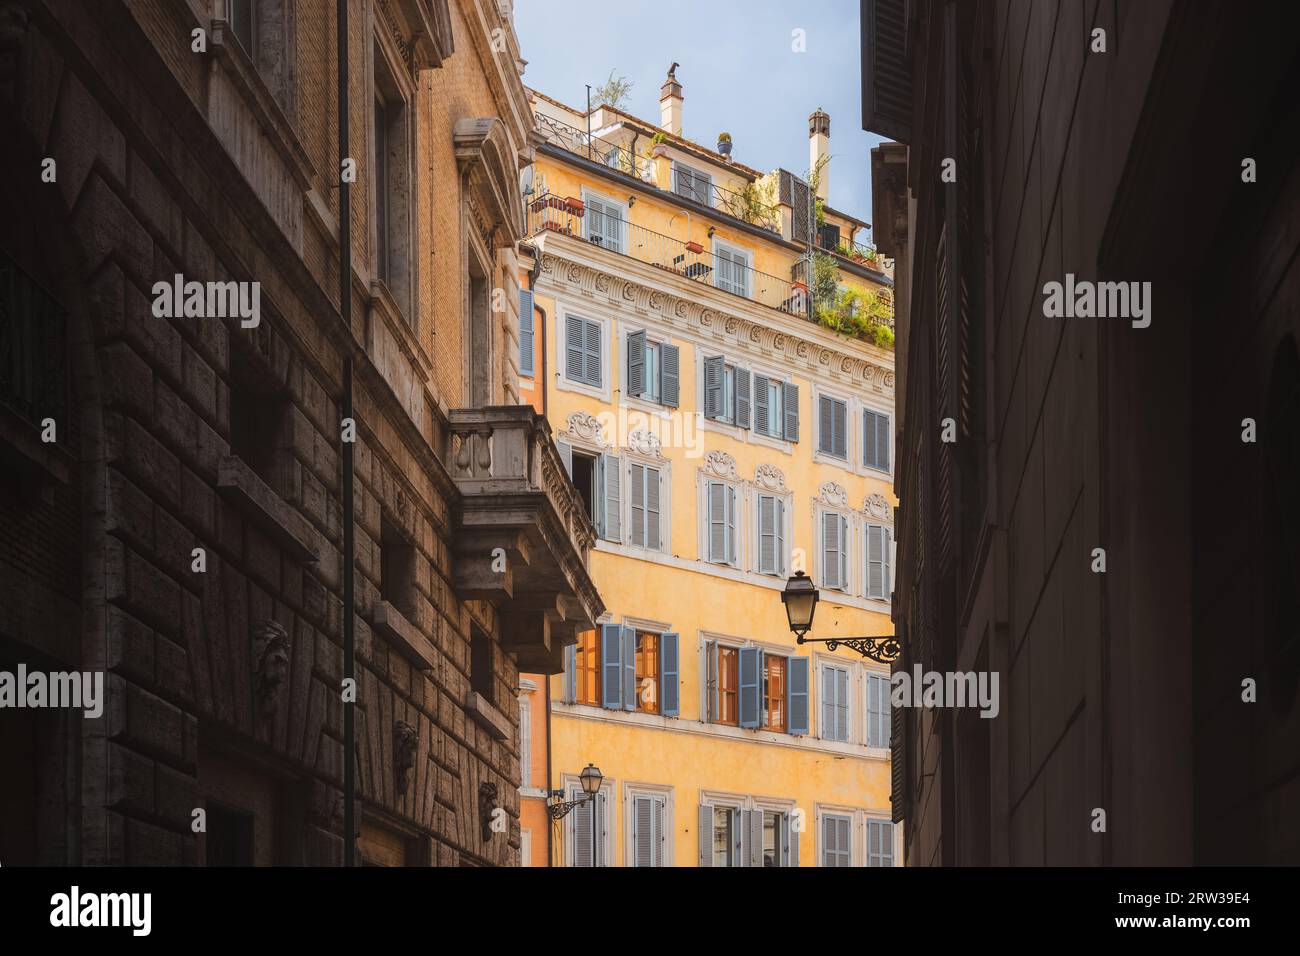 Traditional and colourful residential buildings and architecture in Rione VI Parione in central old town of historic Rome, Italy. Stock Photo